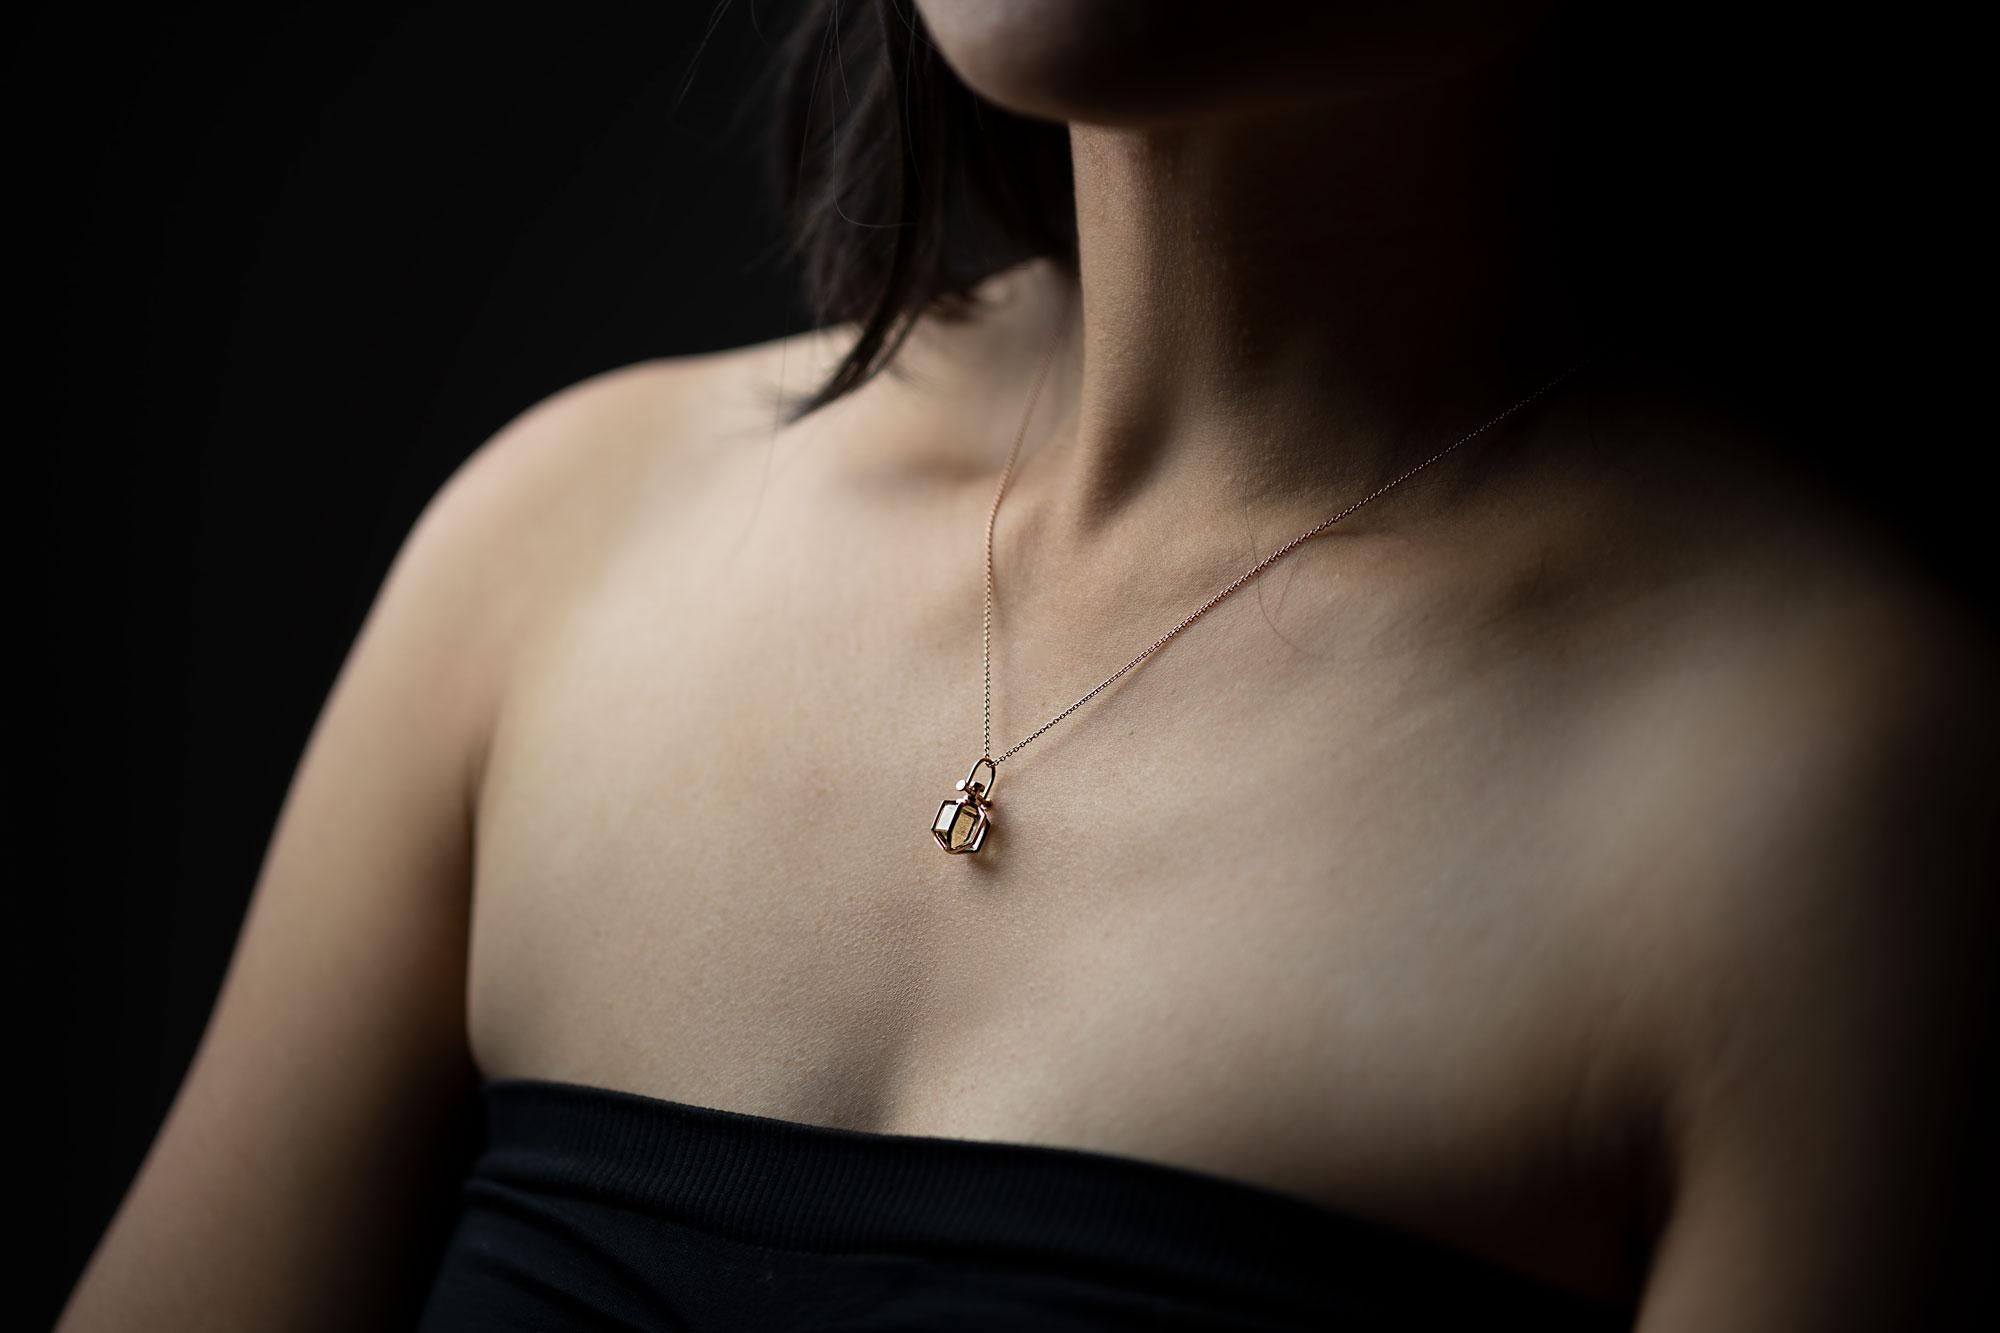 Rebecca Li designs mindfulness.
This sacred hexagon inspired necklace  signifies our intuition.
Citrine means Wealth, Abundance & Luck

Talisman Pendant :
18K Rose Gold
Natural Lemon Citrine
Pendant Size: 9 mm W * 9 mm D * 18 mm H
Gemstone Size:  8